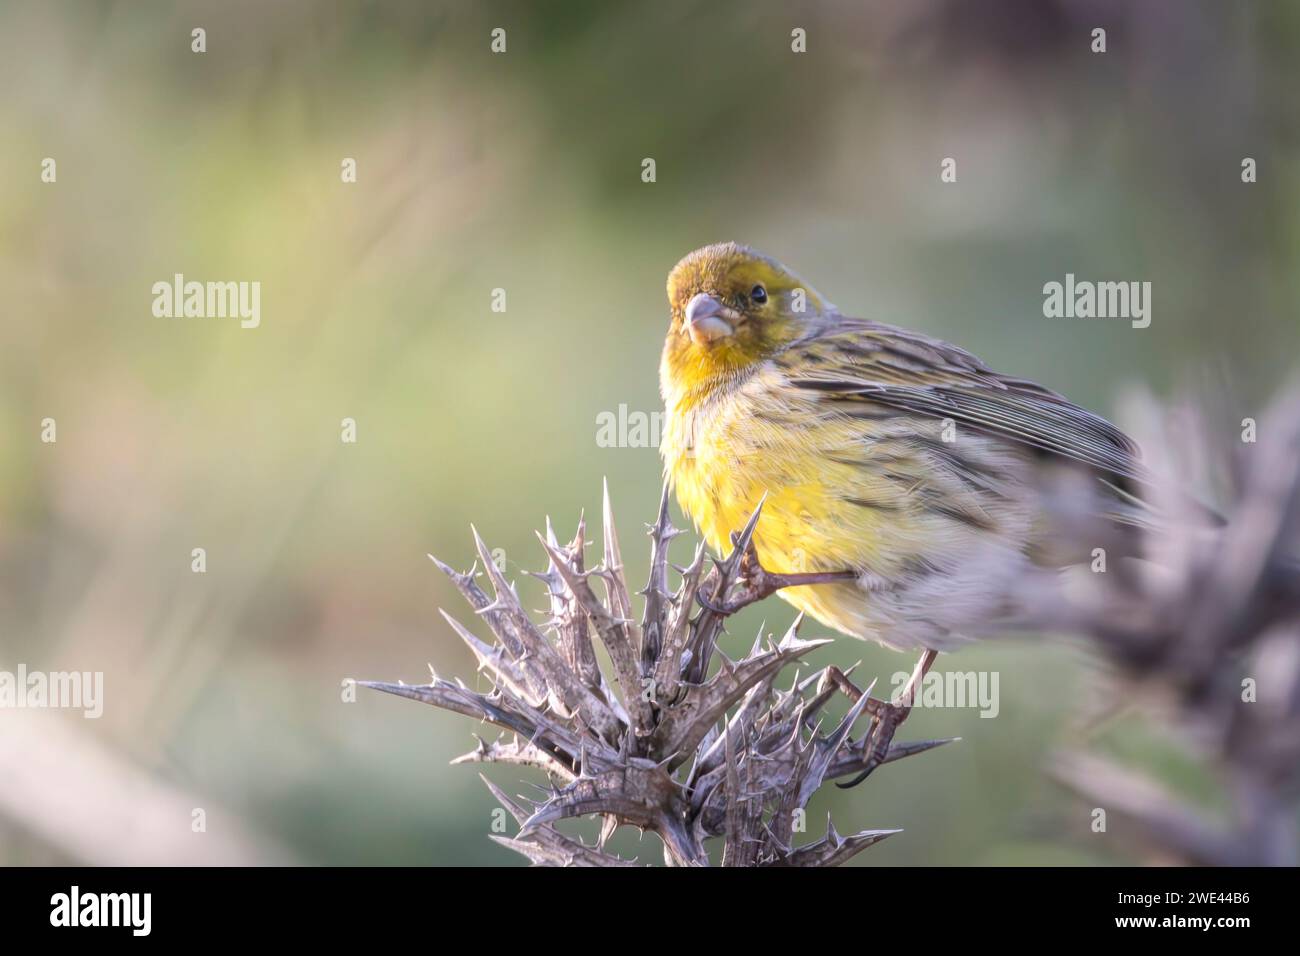 Serinus canaria perched on a plant eating feeding Stock Photo